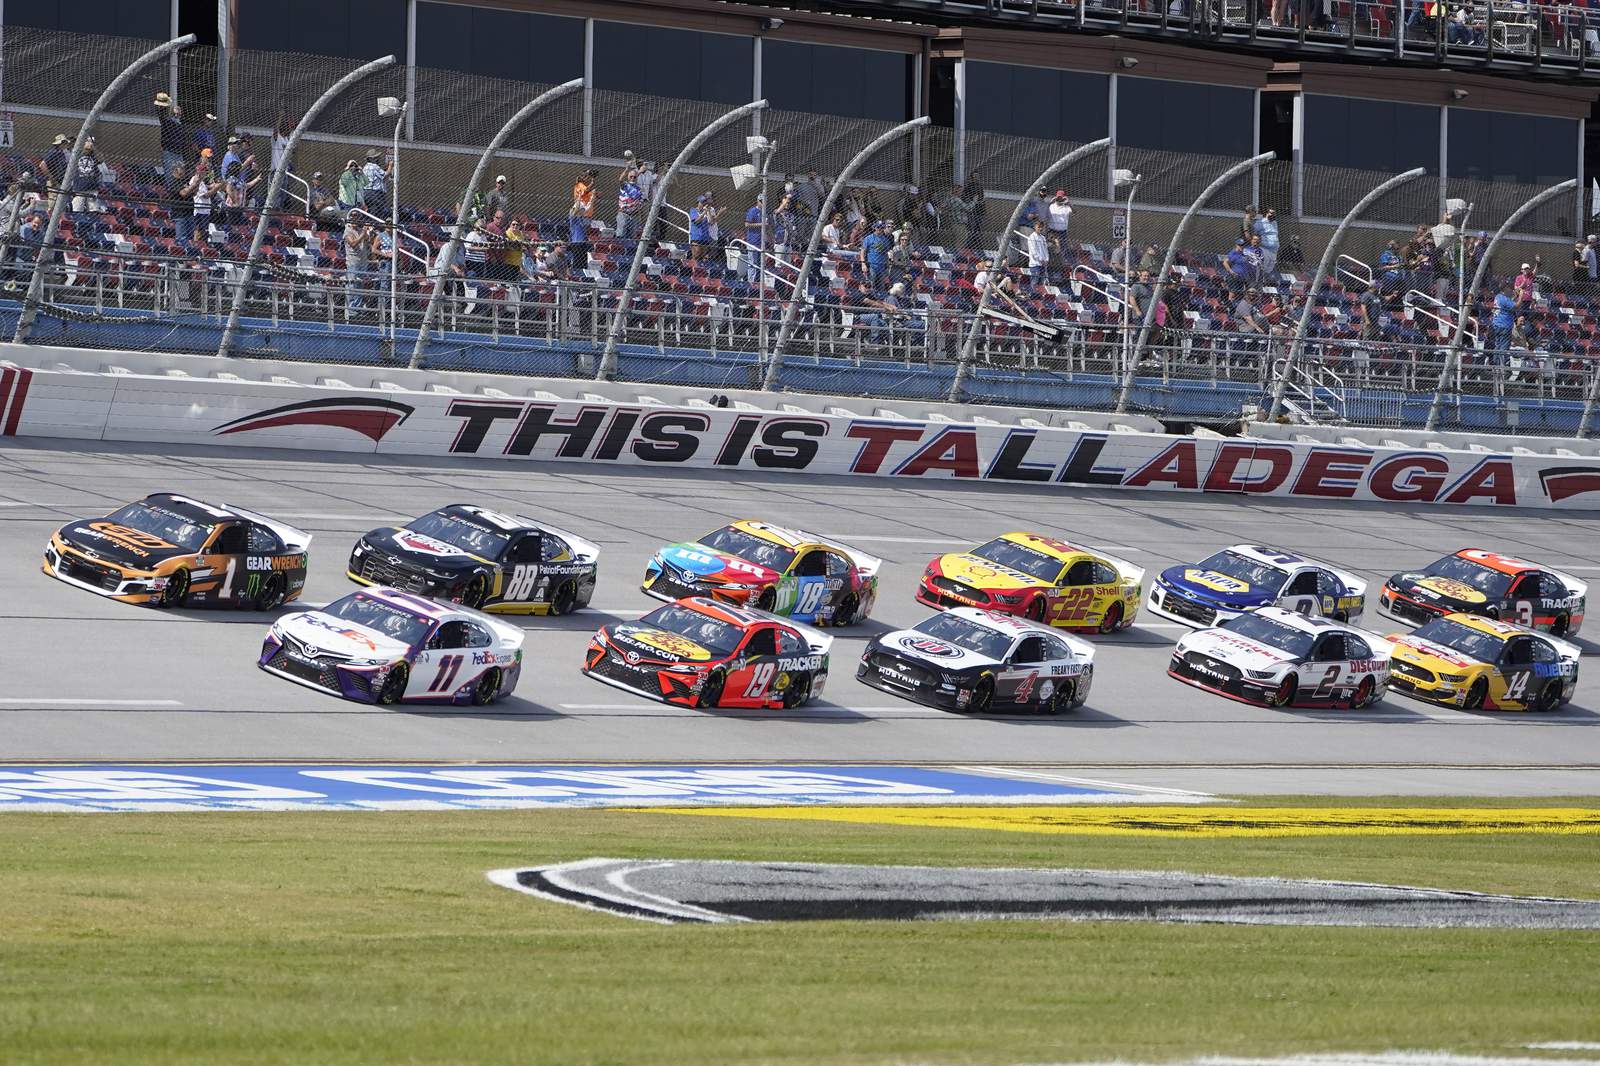 Talladega briefly stopped after 13-car crash and wall damage